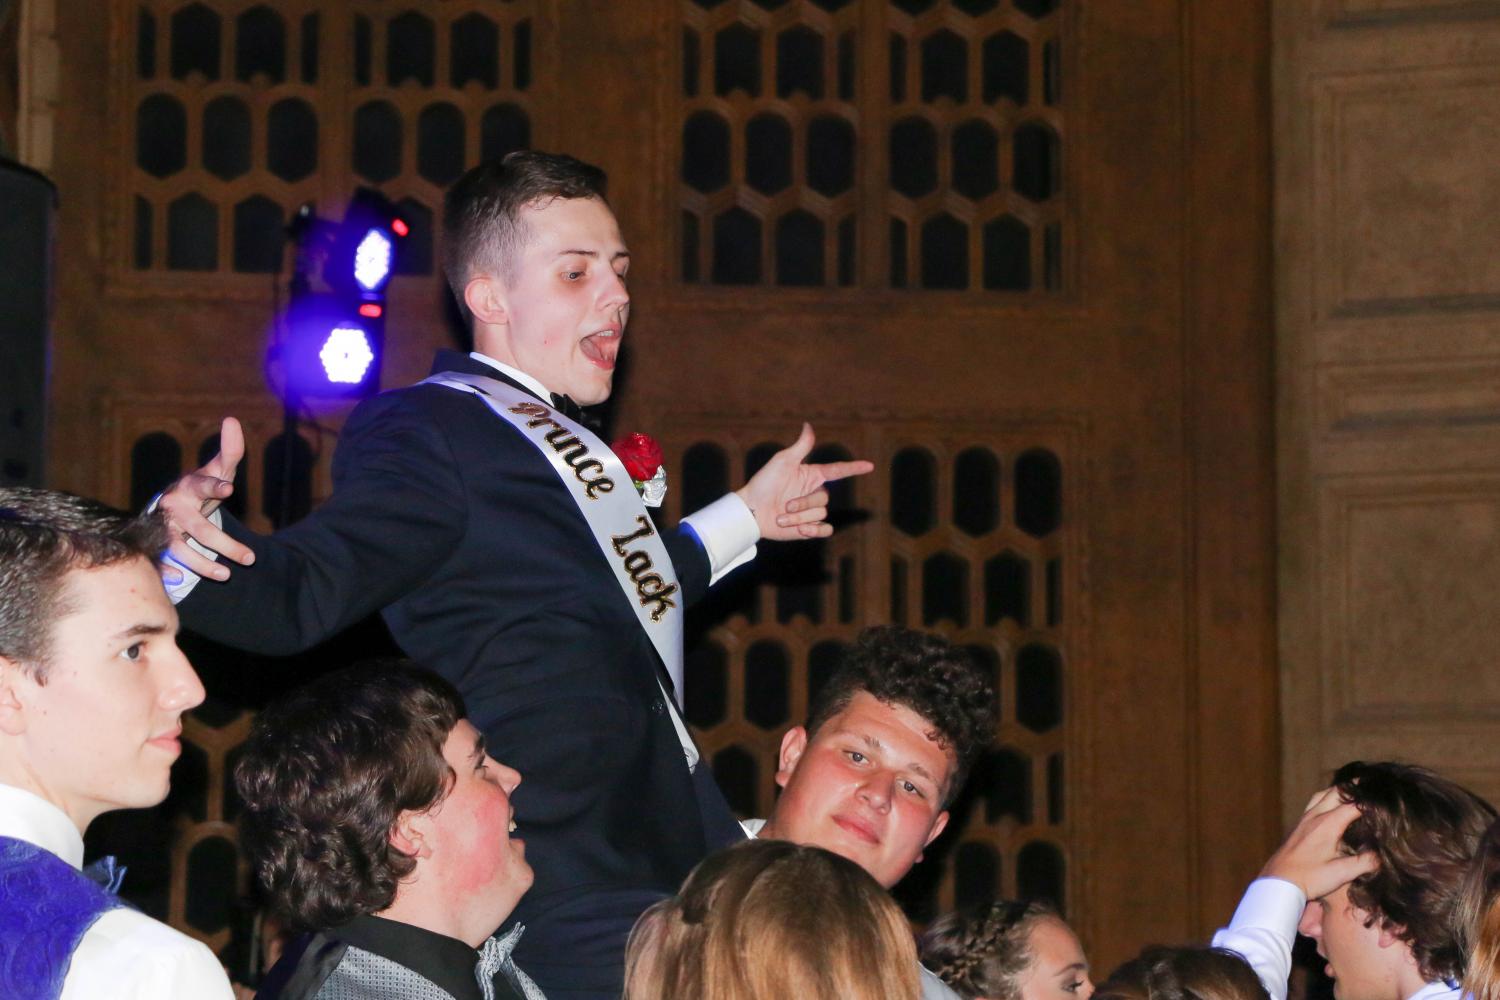 Last+years+prom+king%2C+Zack+Dean%2C+being+lifted+by+the+crowd+at+prom.